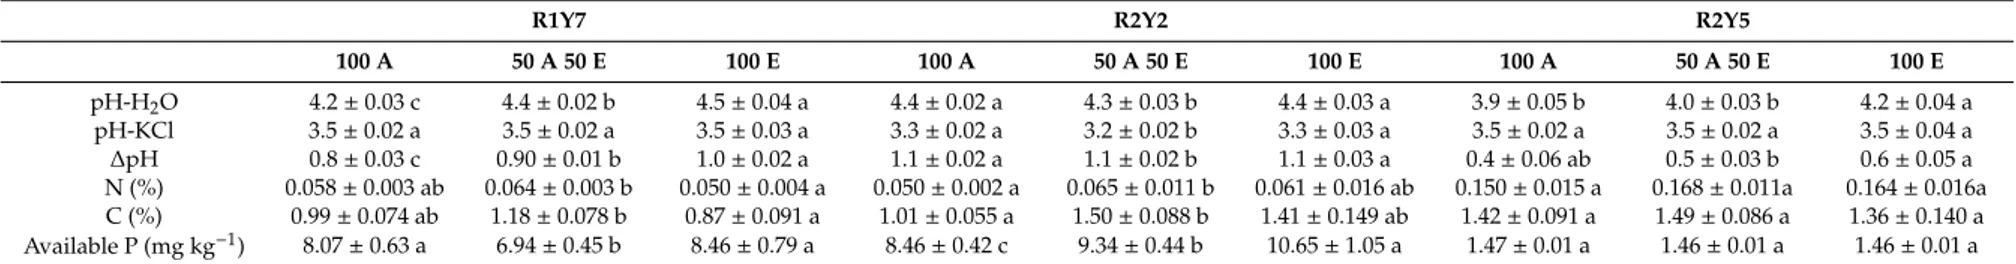 Table 1. Soil pH, N and C concentrations, and available P at different stages of rotation from the end of year 7 of the first rotation (R1Y7), year 2 of the second rotation (R2Y2), and year 5 of the second rotation (R2Y5).